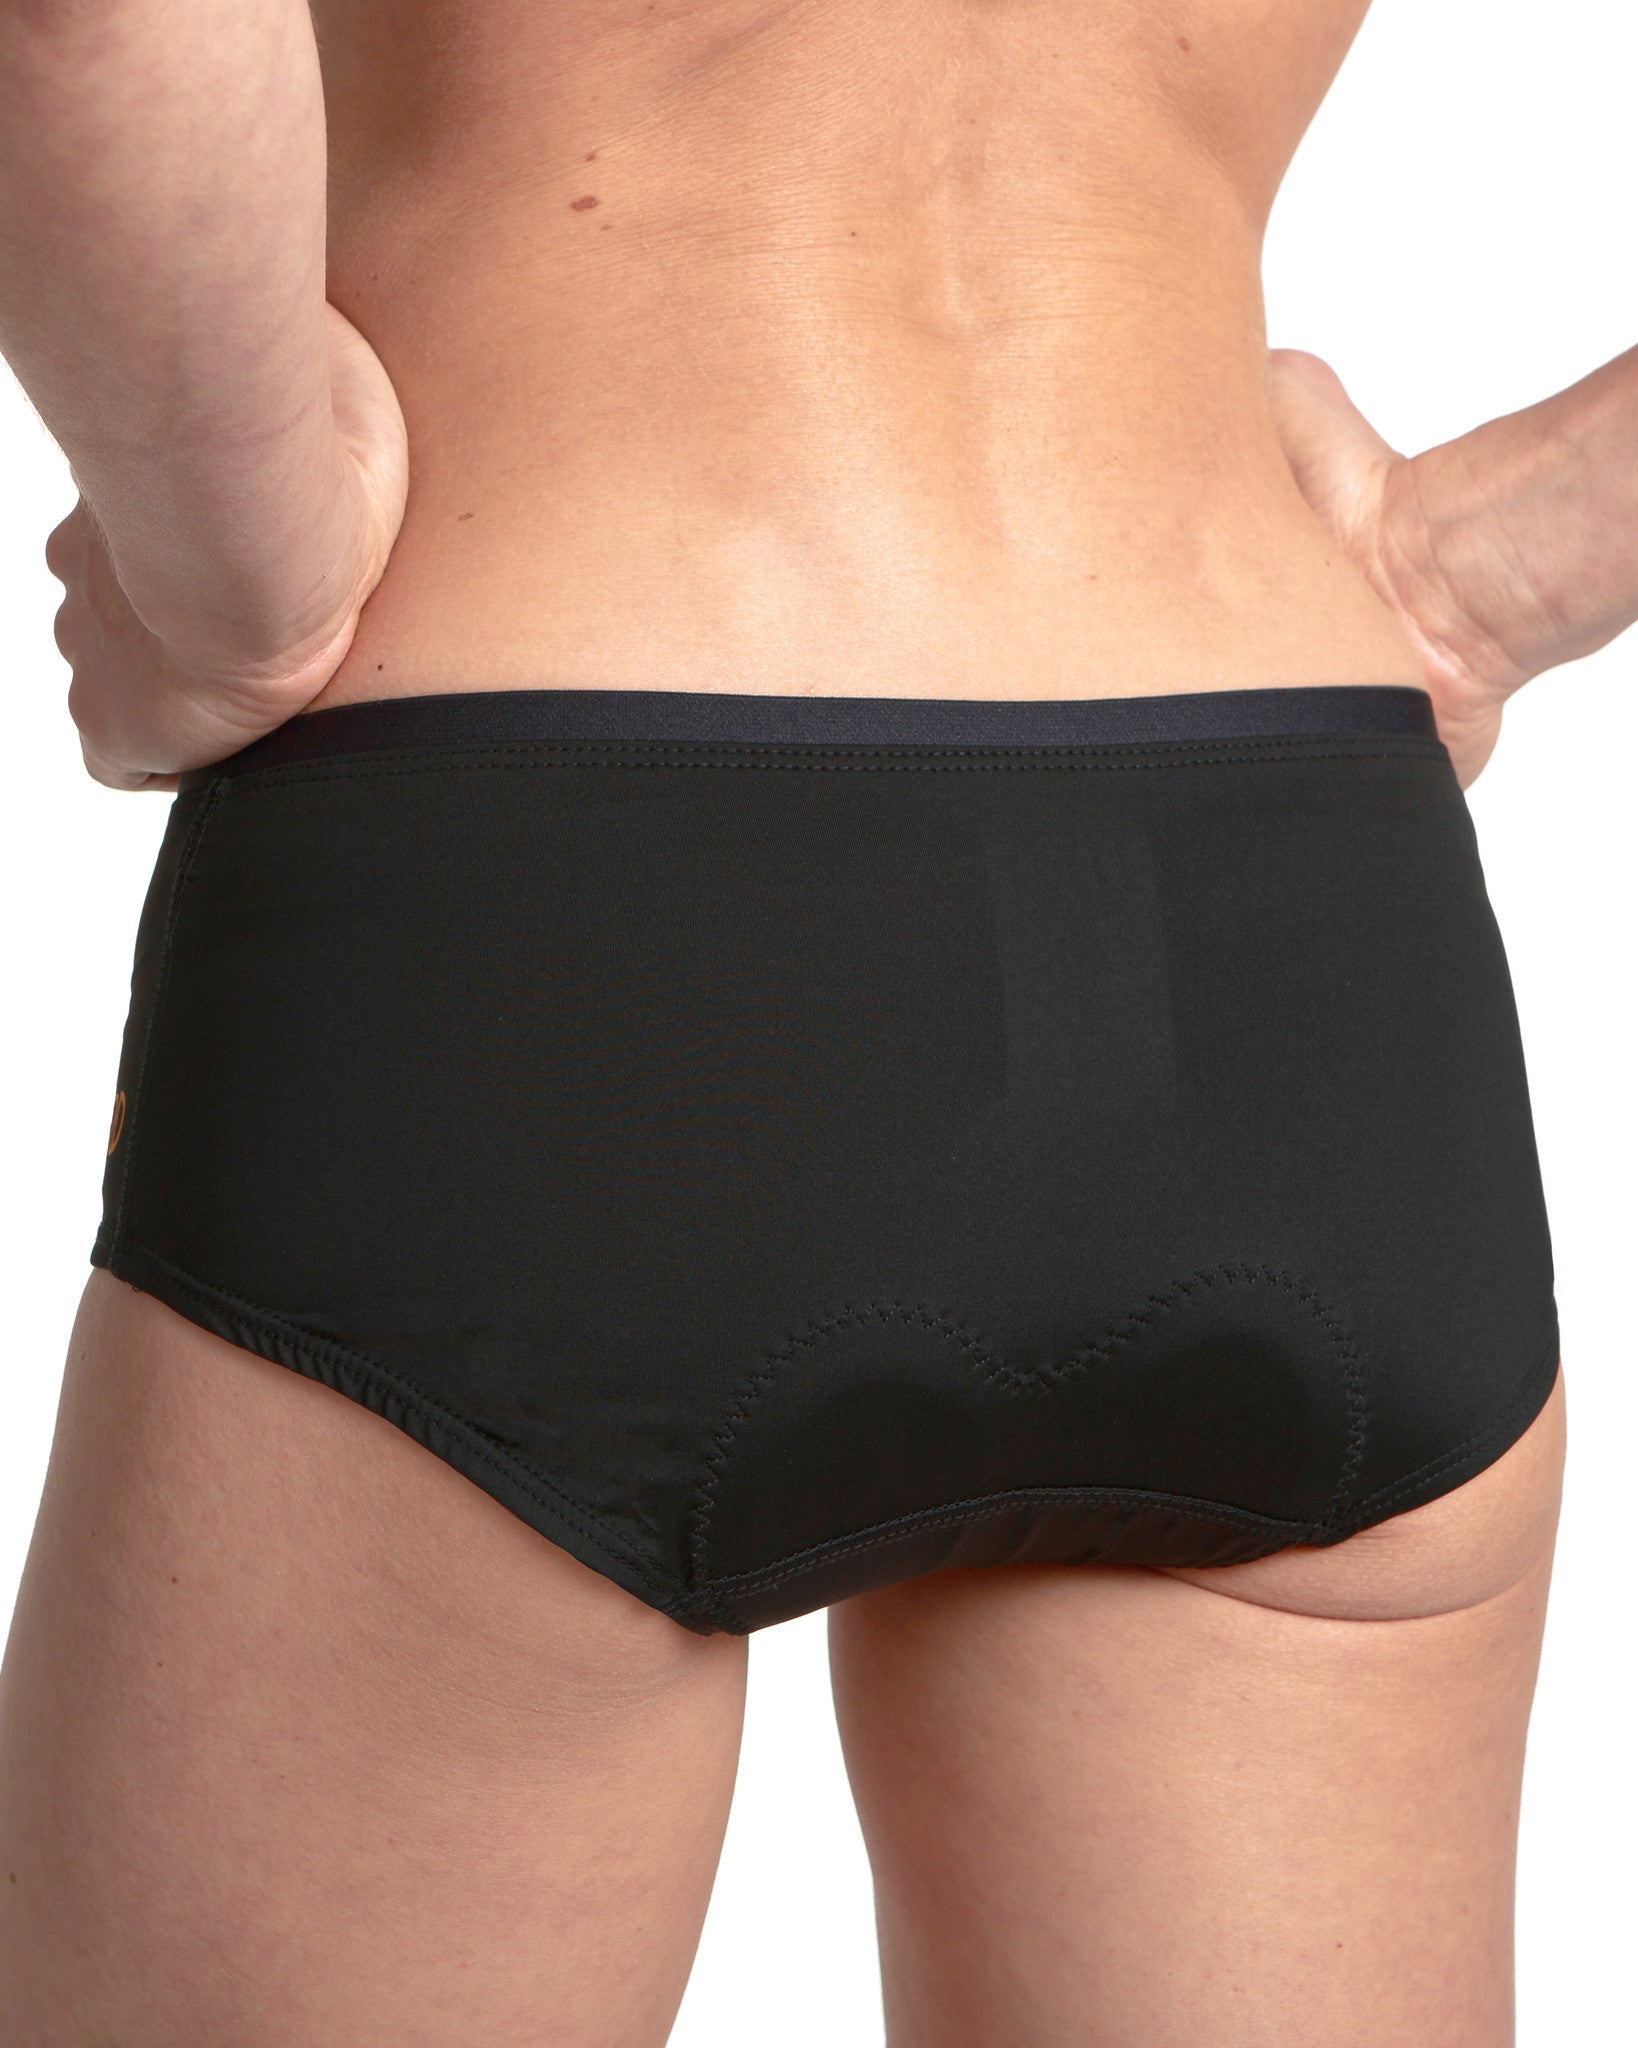 LPRD Black Cycling Hipster Undies | Close-up Back View